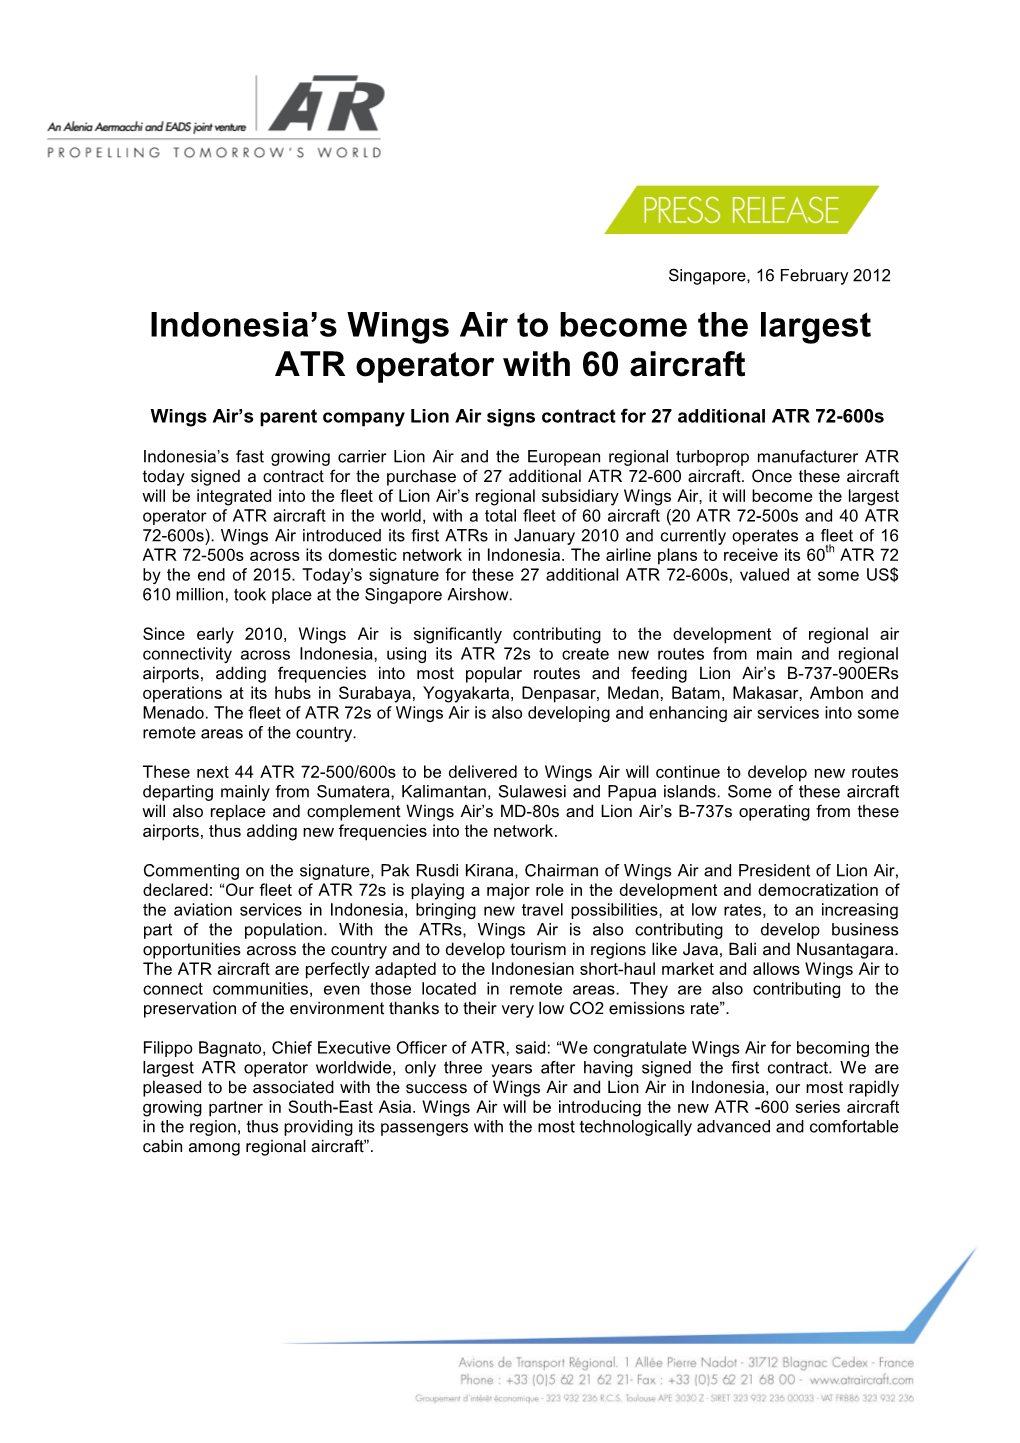 Indonesia's Wings Air to Become the Largest ATR Operator with 60 Aircraft